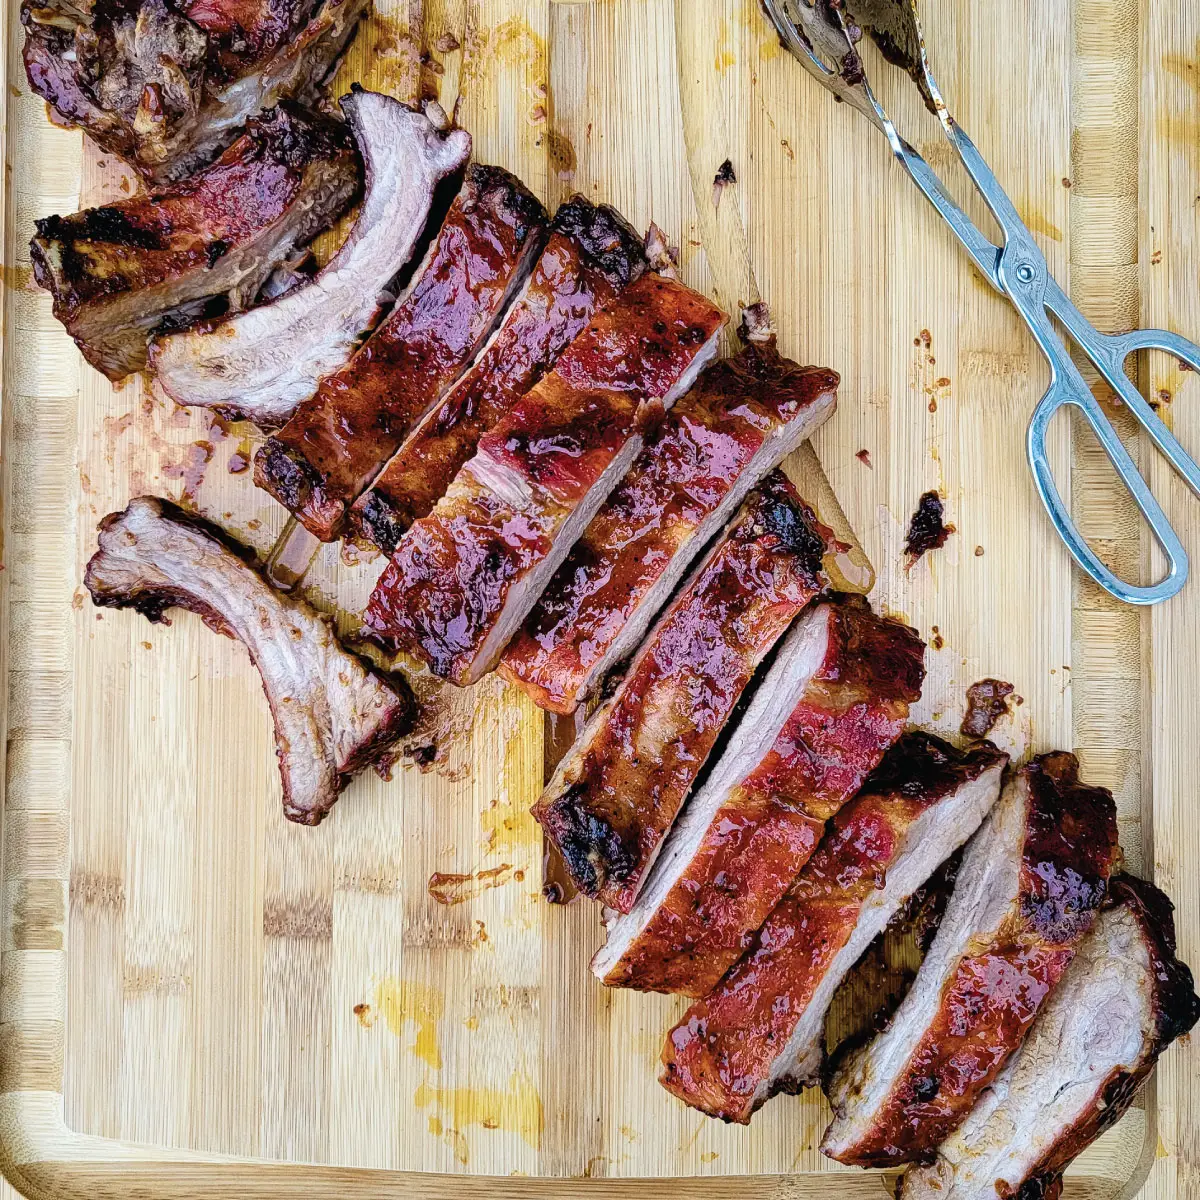 Ribs cut up on cutting board ready to be served